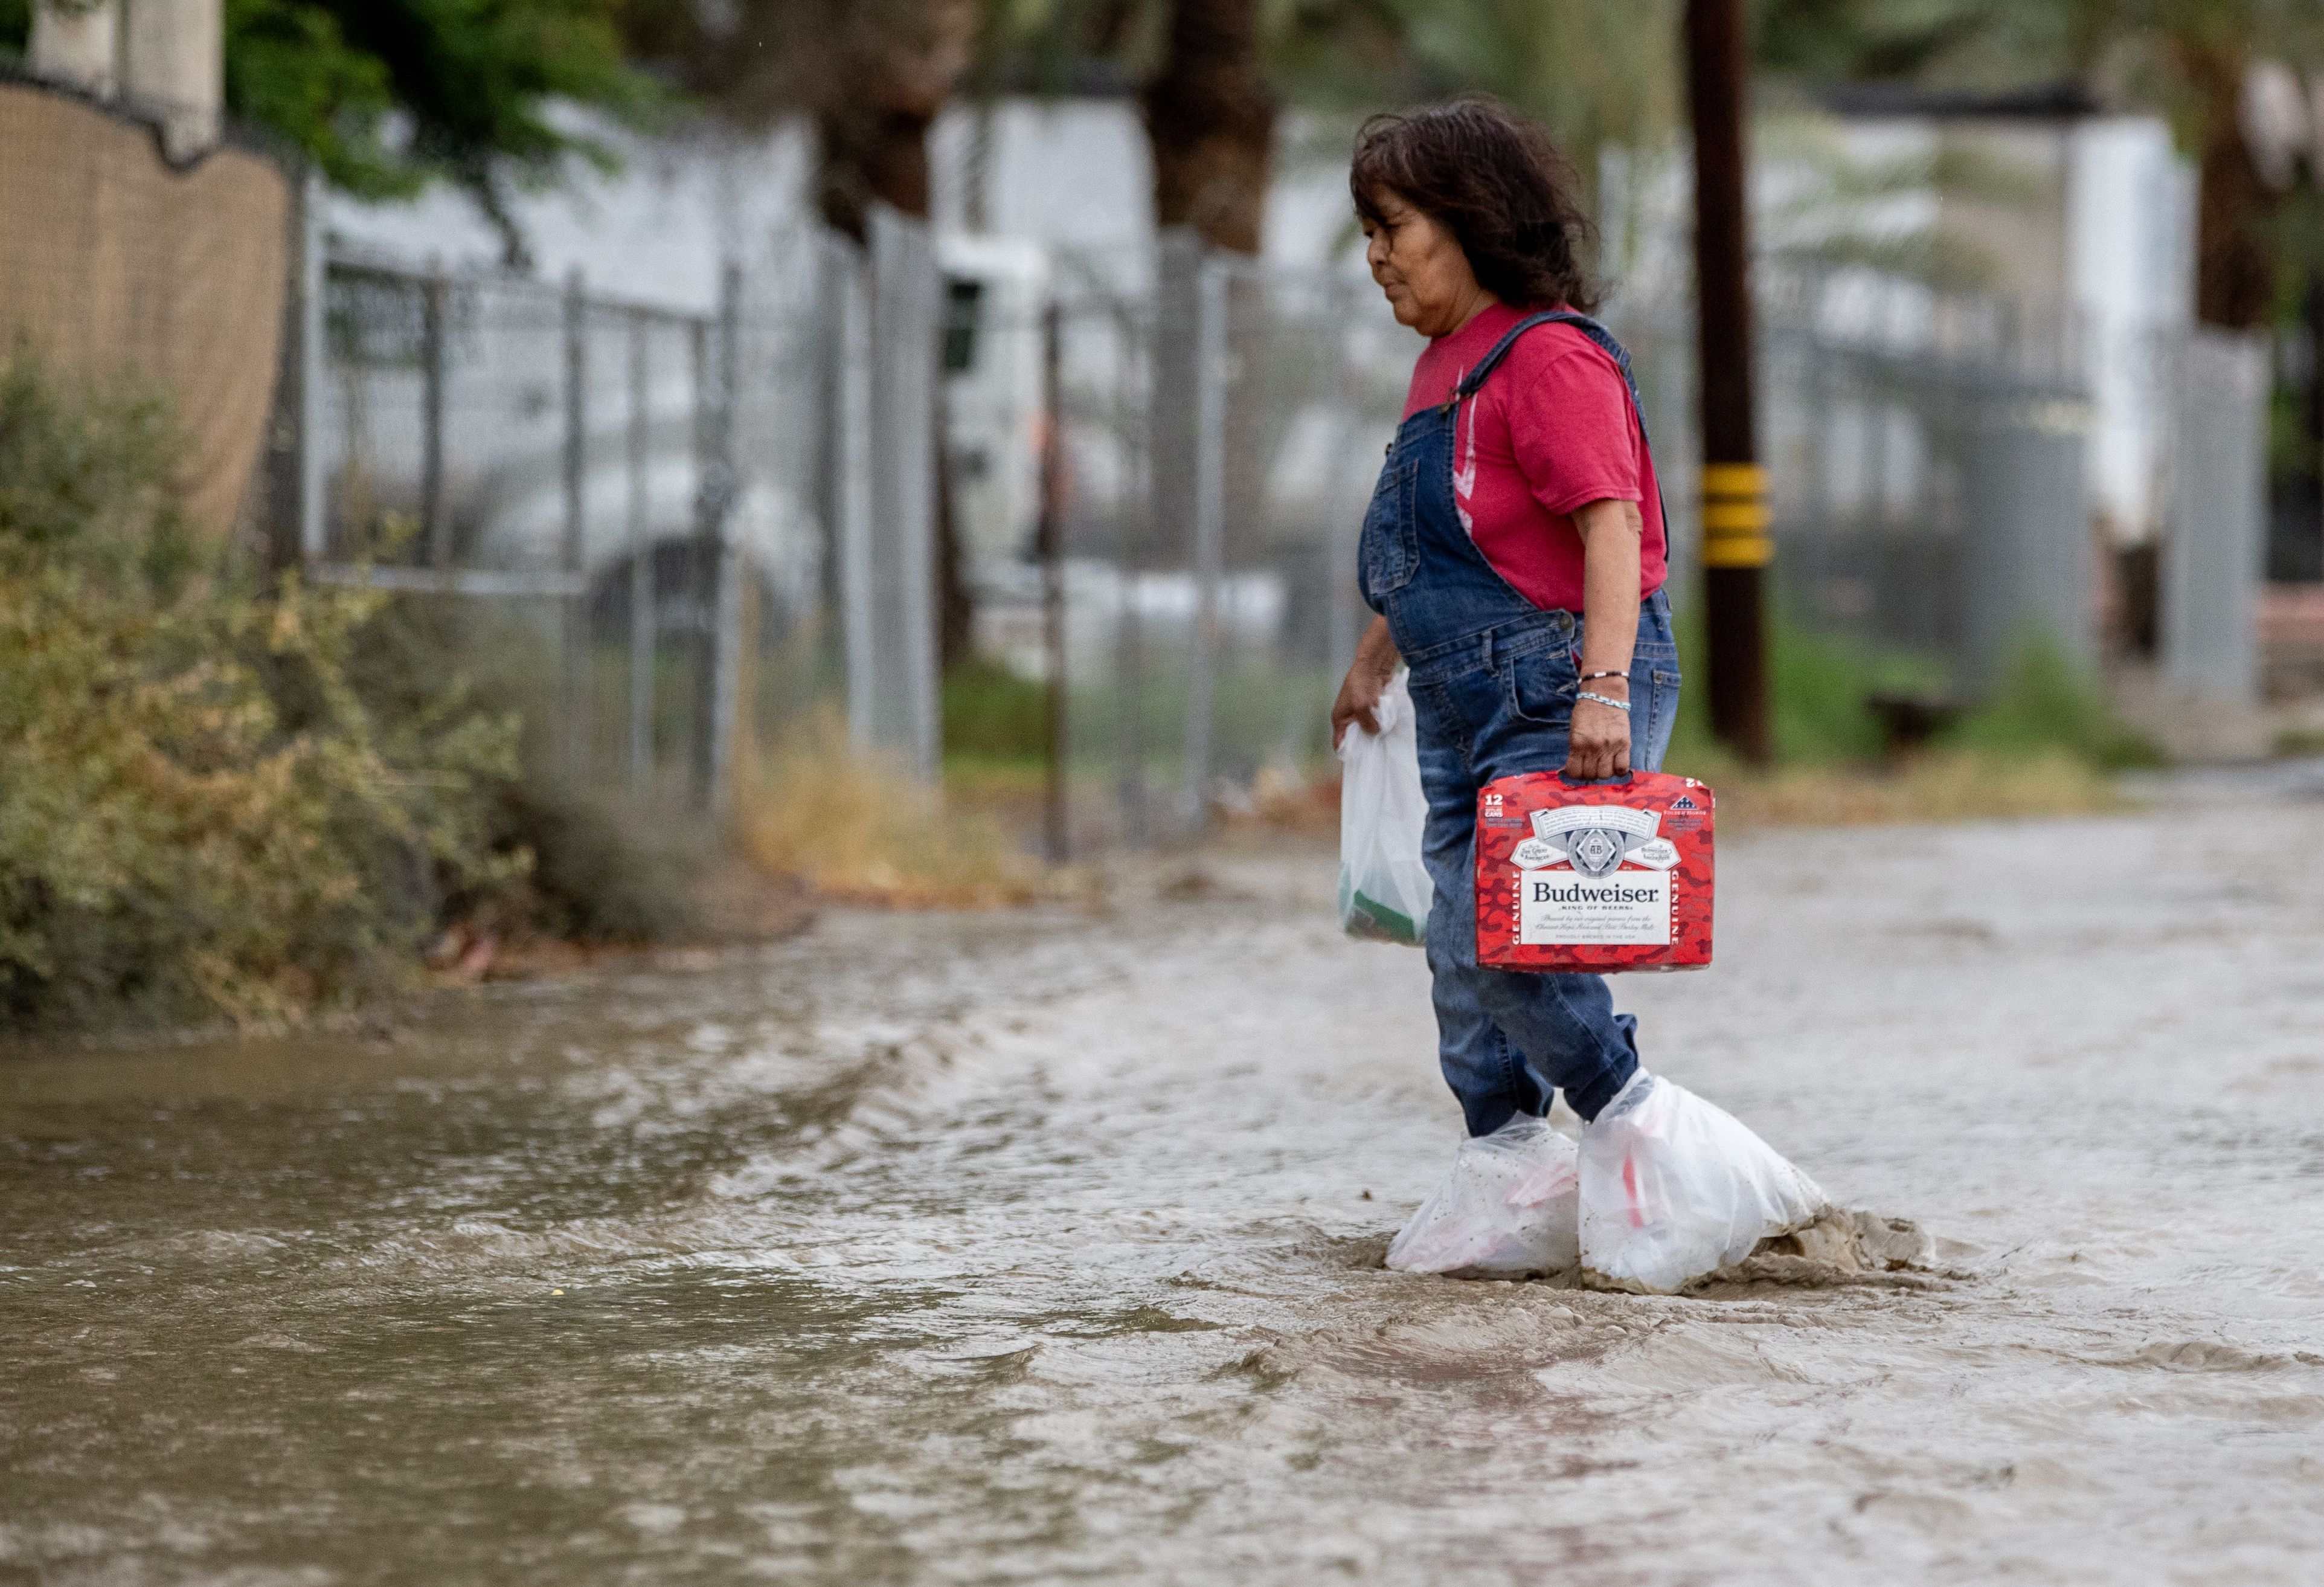 Nannie Auclair wears plastic bags on her feet as she traverses through flood waters carrying a case of Budweiser she just bought at a neighborhood market as tropical storm Hilary dumps torrential rain on the area on August 20, 2023 in Thermal, California.